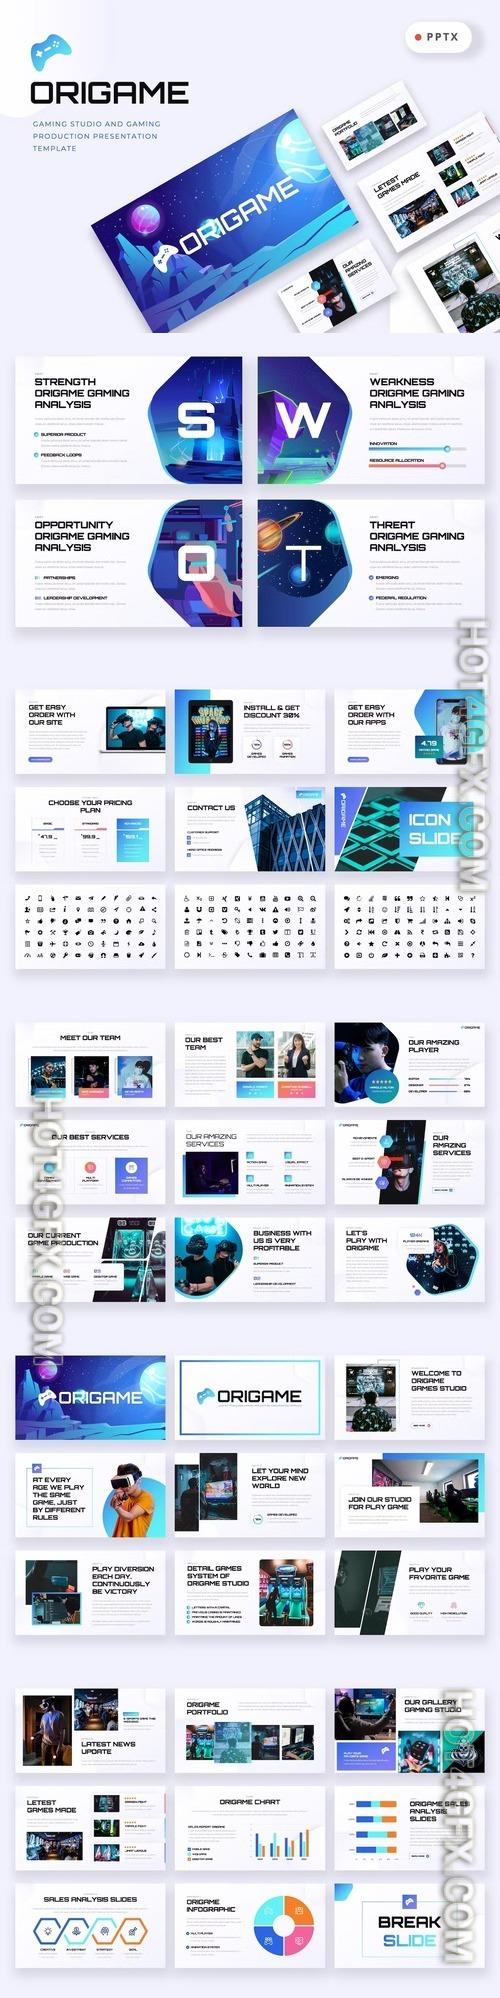 ORIGAME - Gaming Studio Powerpoint Template